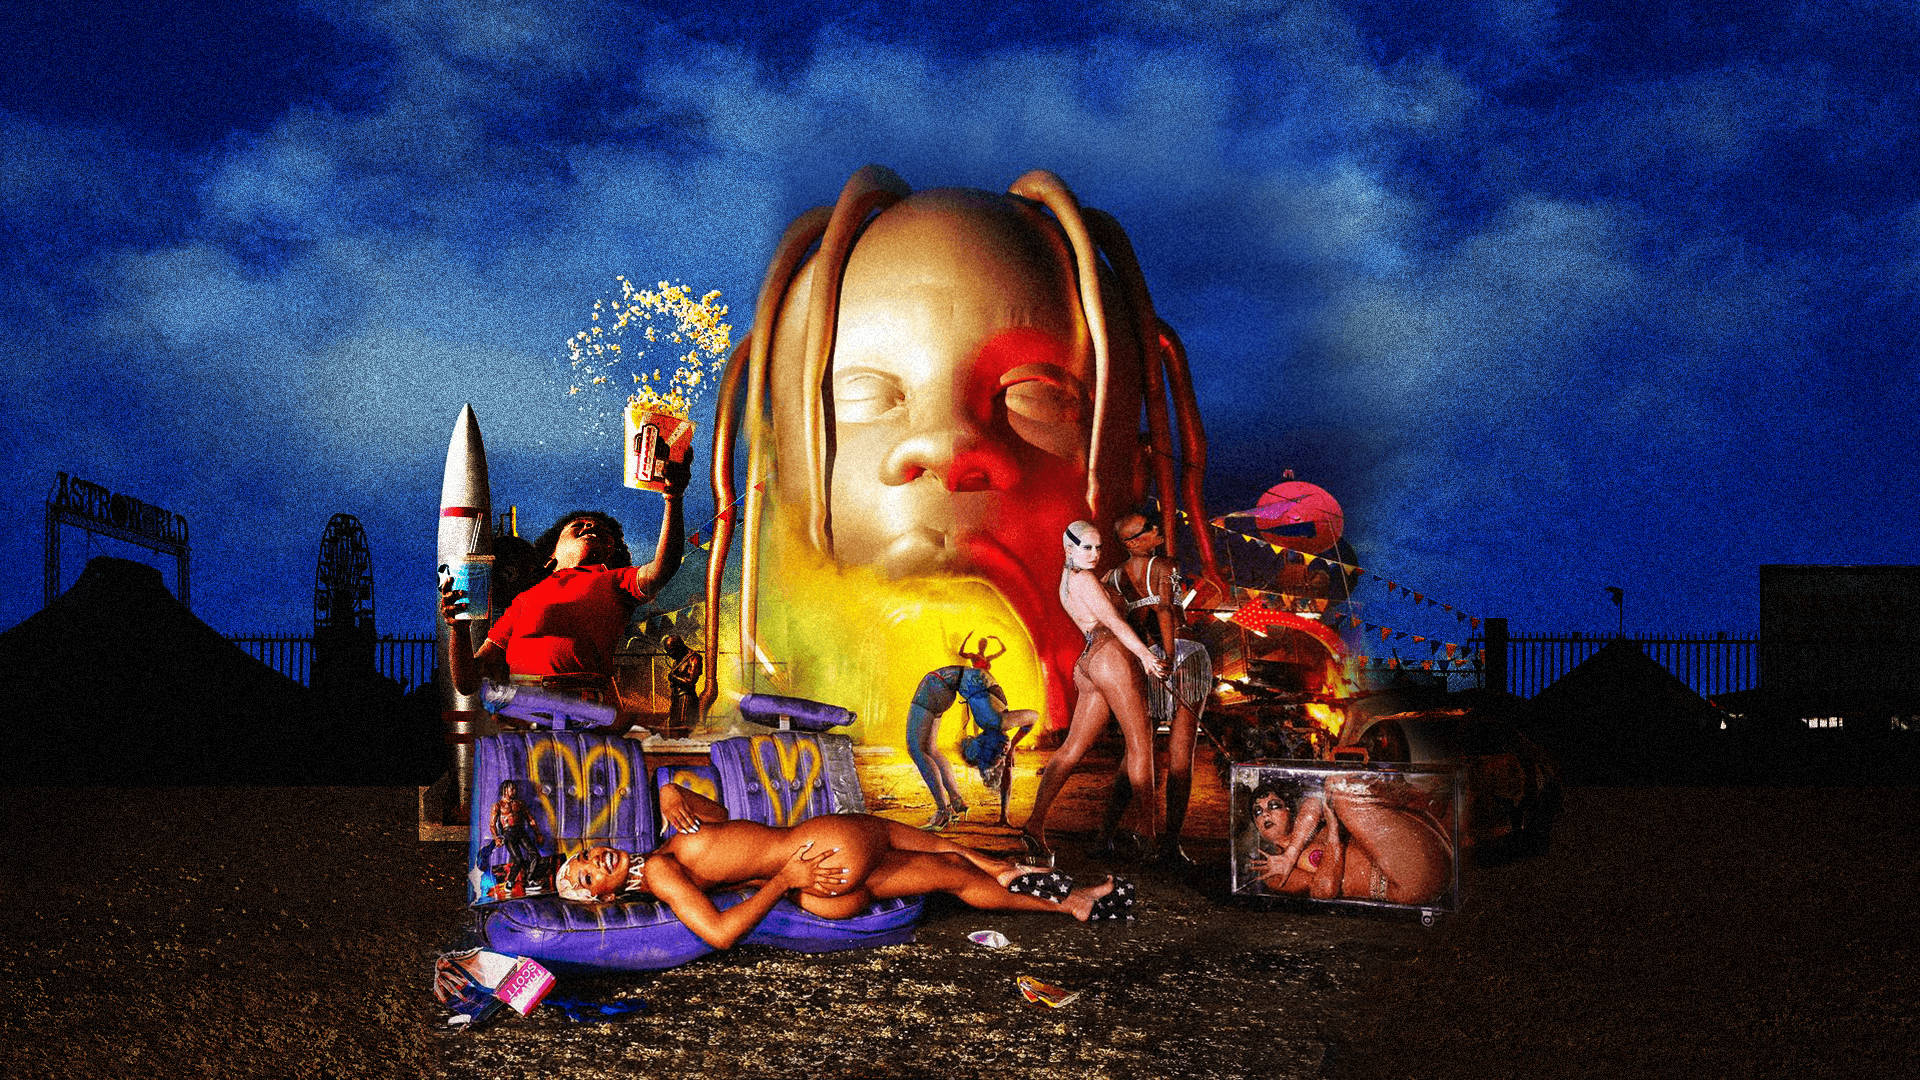 Astroworld Wallpapers